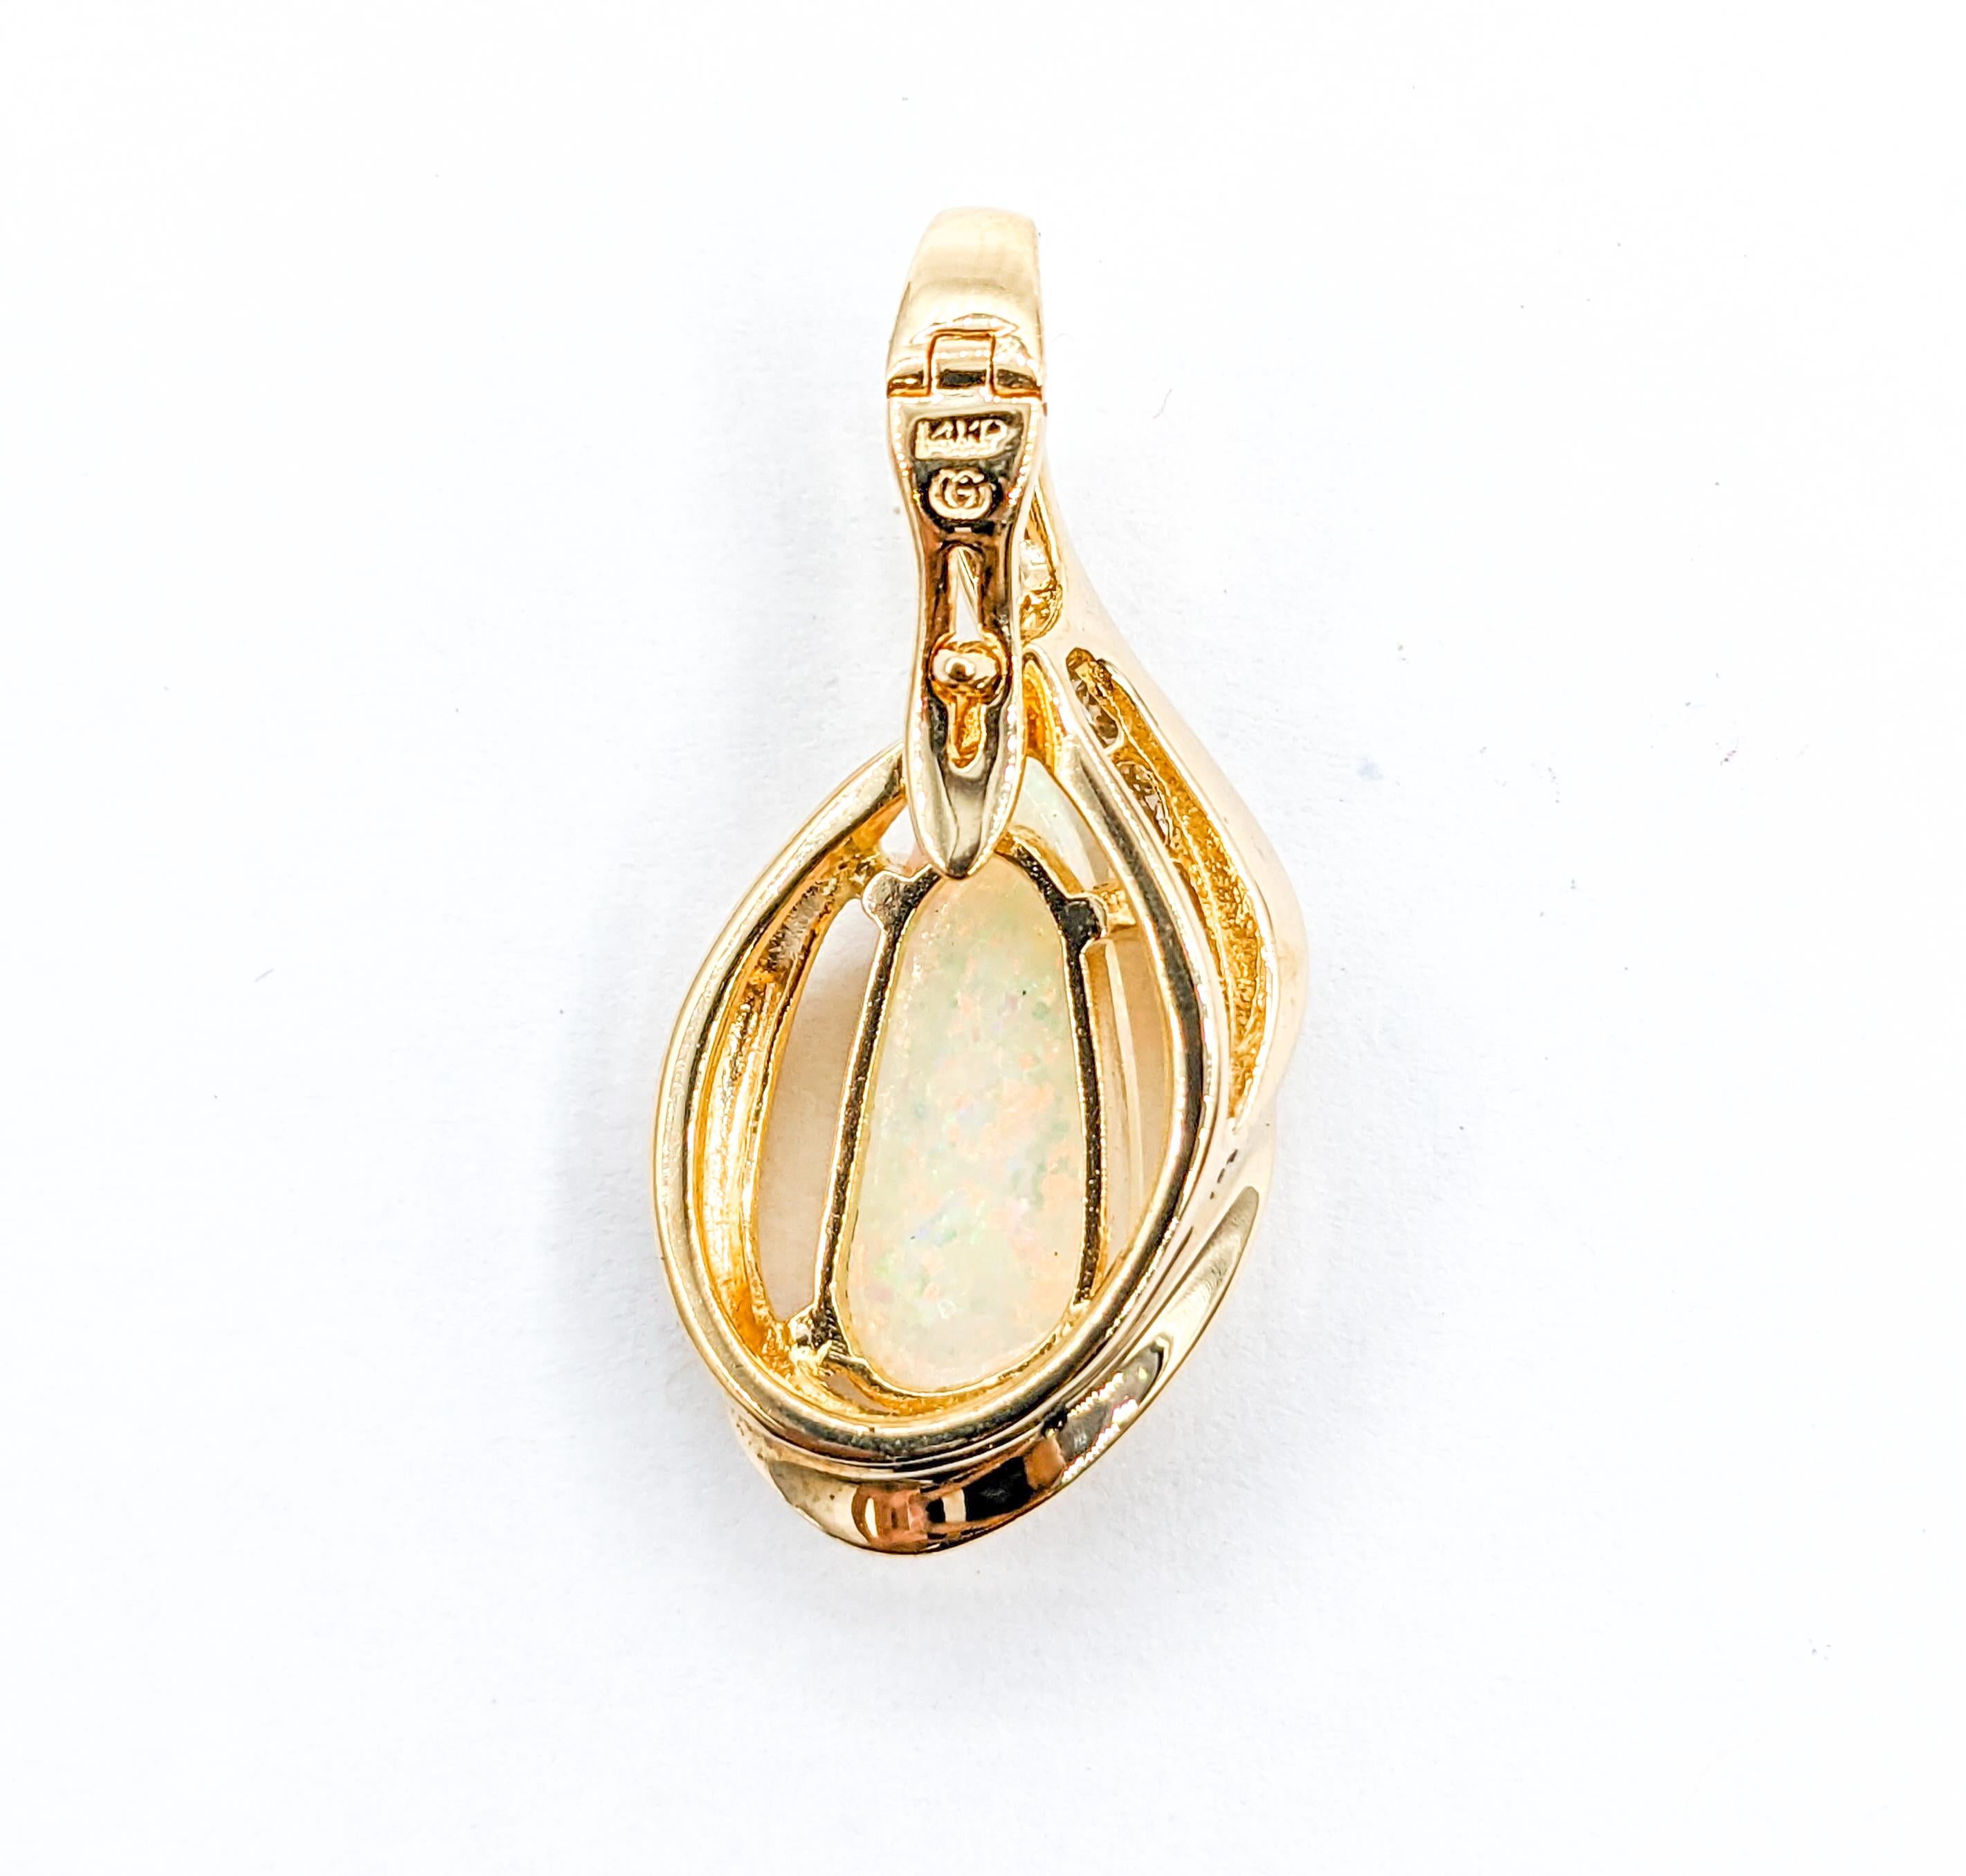 Opal & Diamond Enhancer Pendant Yellow Gold

Presenting an exquisite Pendant, skillfully crafted in 14kt yellow gold. It boasts an enhancer of .25ctw diamonds, each shimmering with SI clarity and a near-colorless brilliance. Complementing this